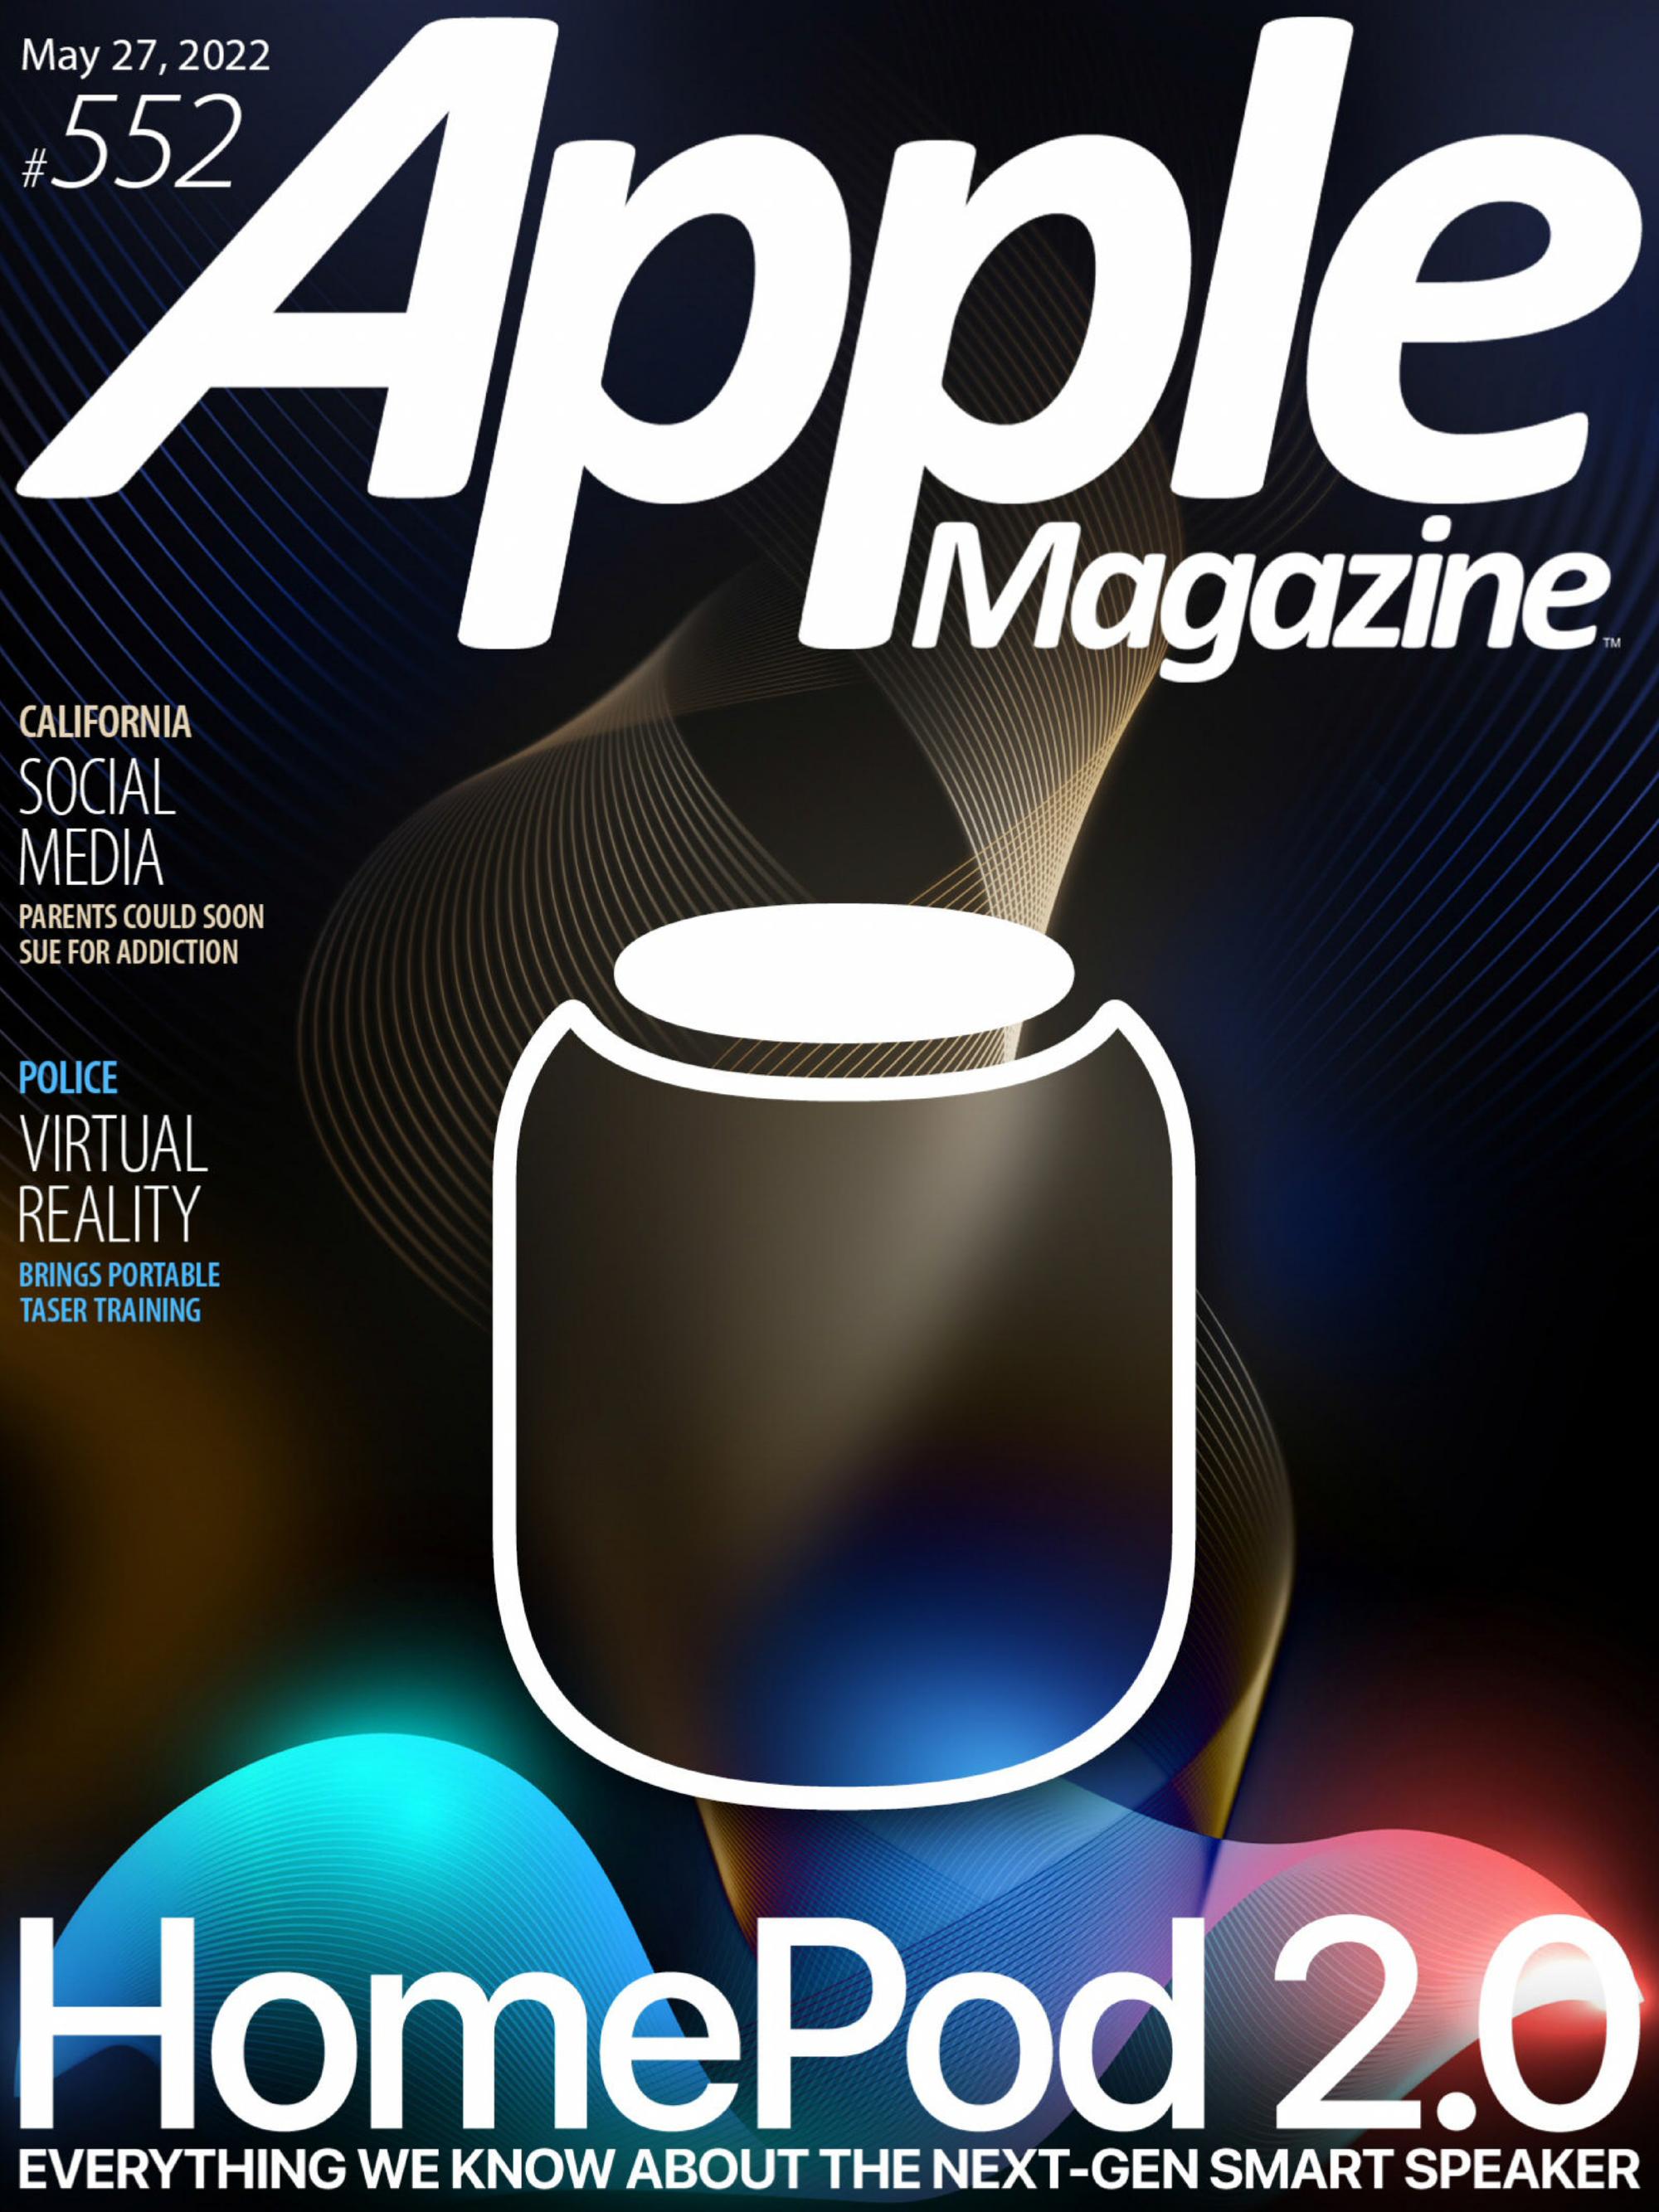 AppleMagazine - May 27, 2022